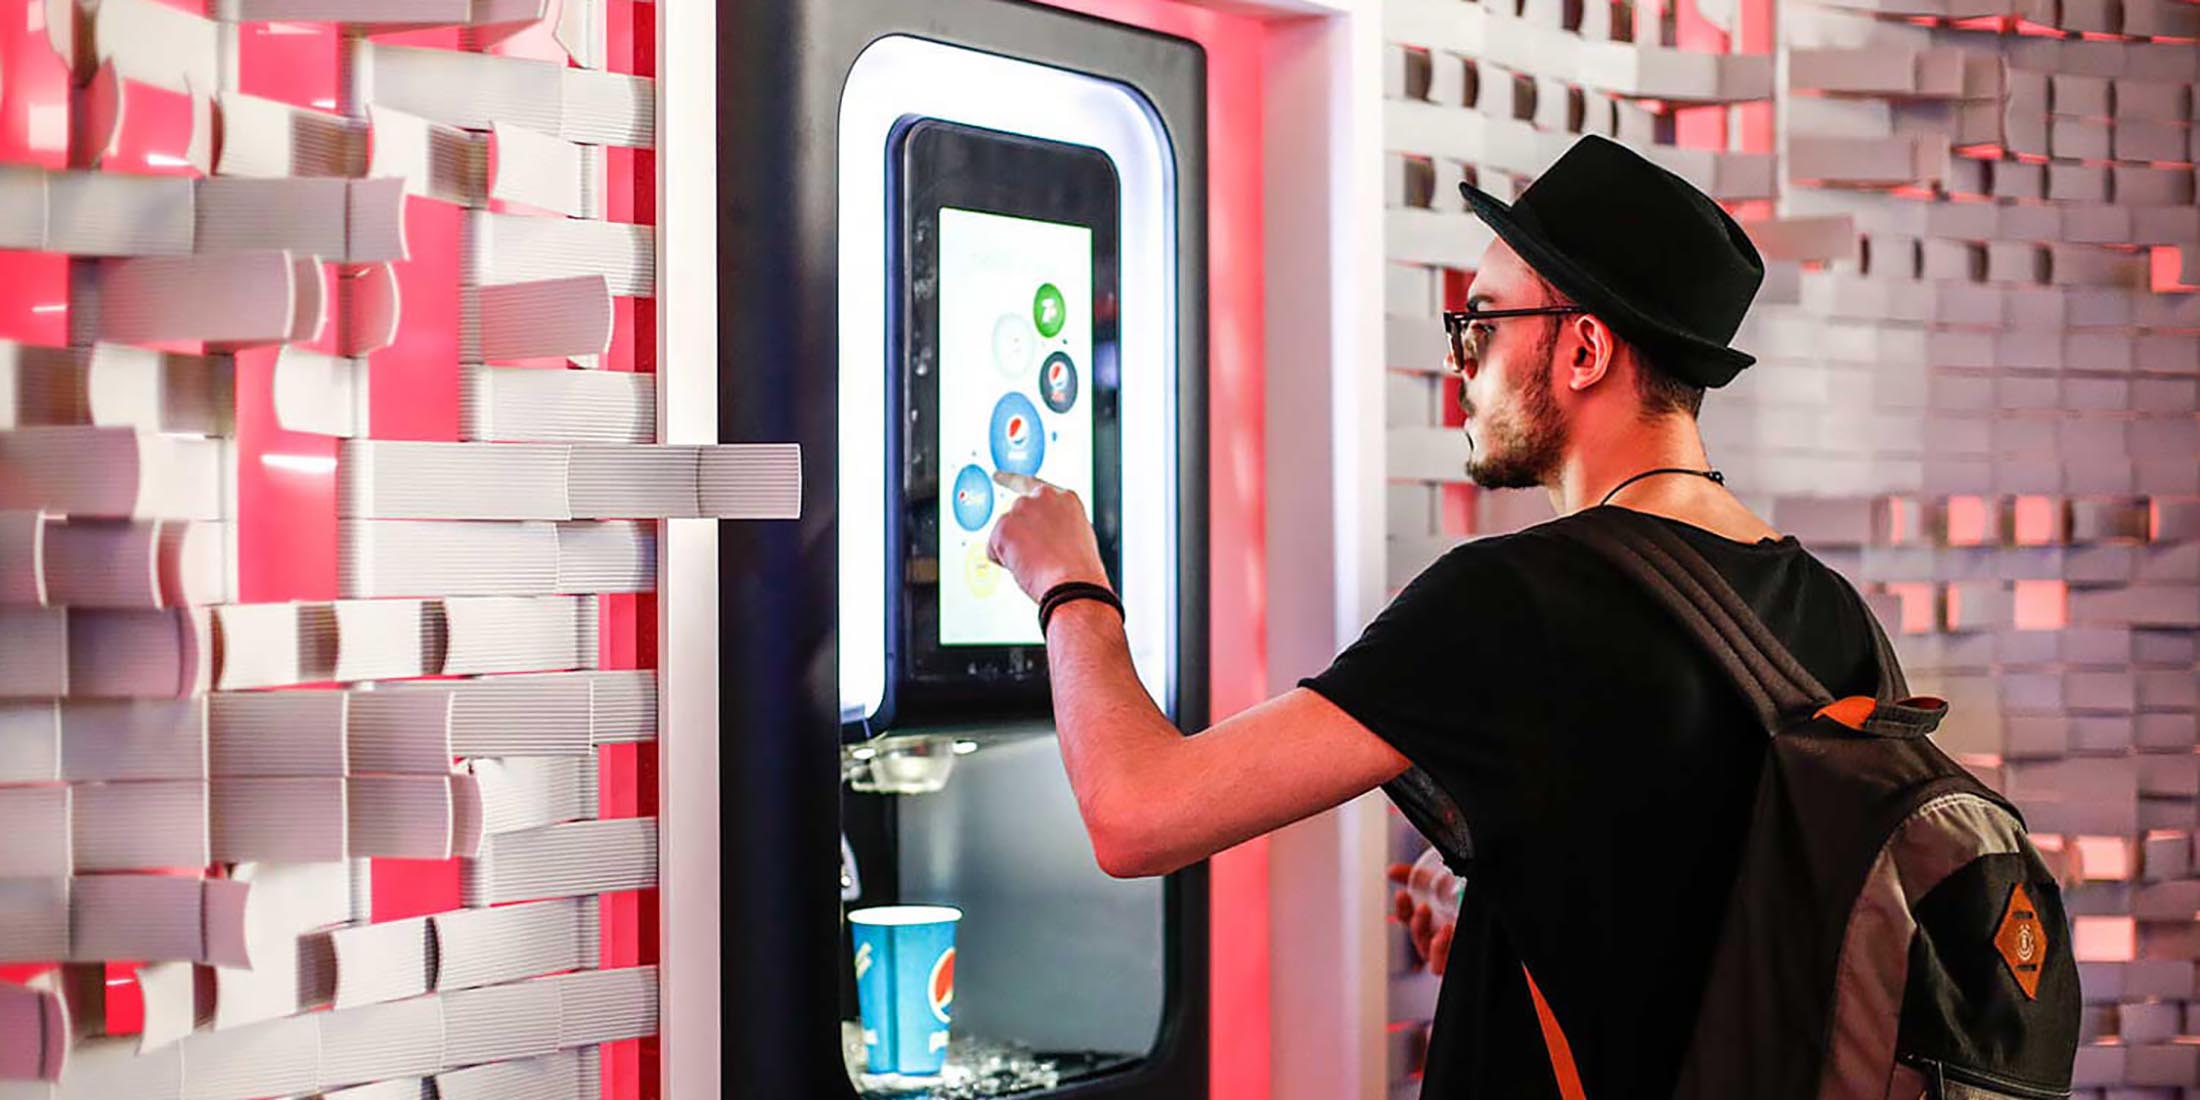 Customer selecting his beverage on the interactive screen